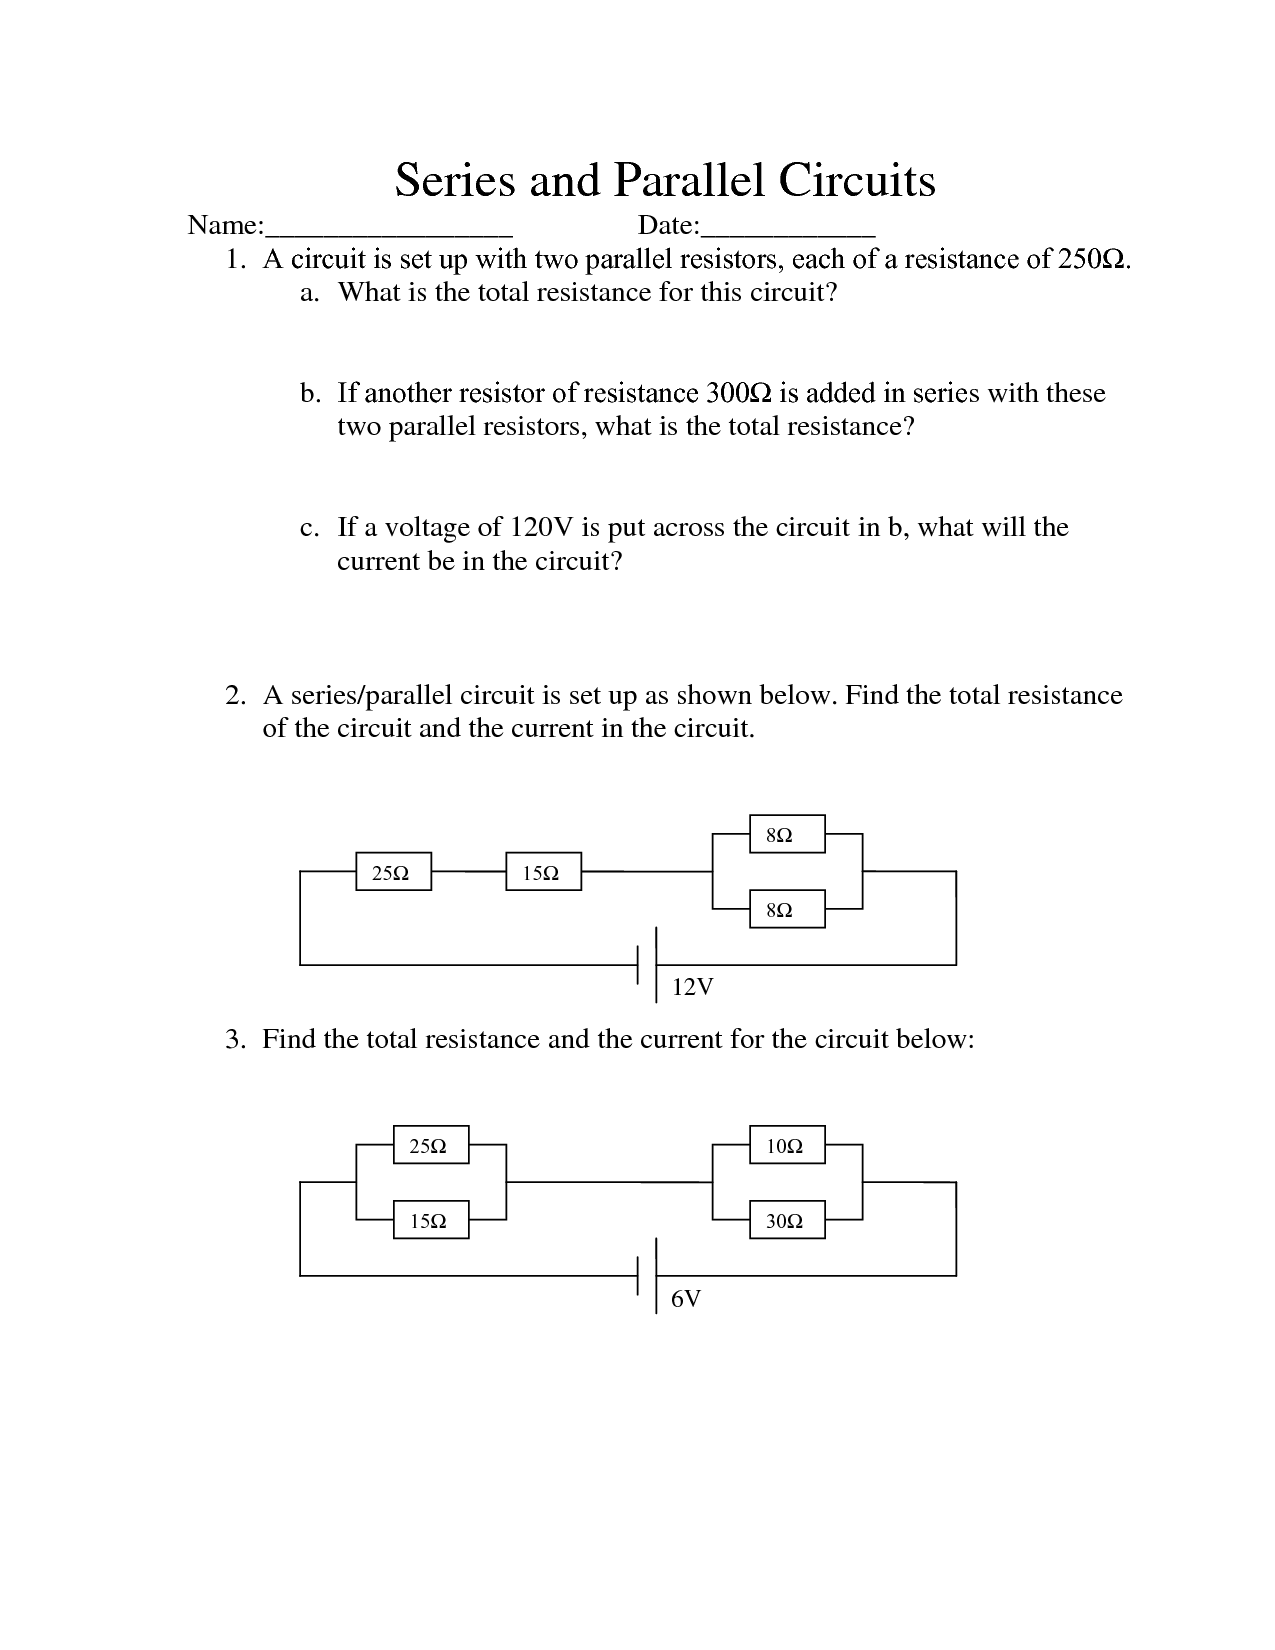 12-best-images-of-series-parallel-circuit-worksheet-series-and-parallel-circuits-worksheets